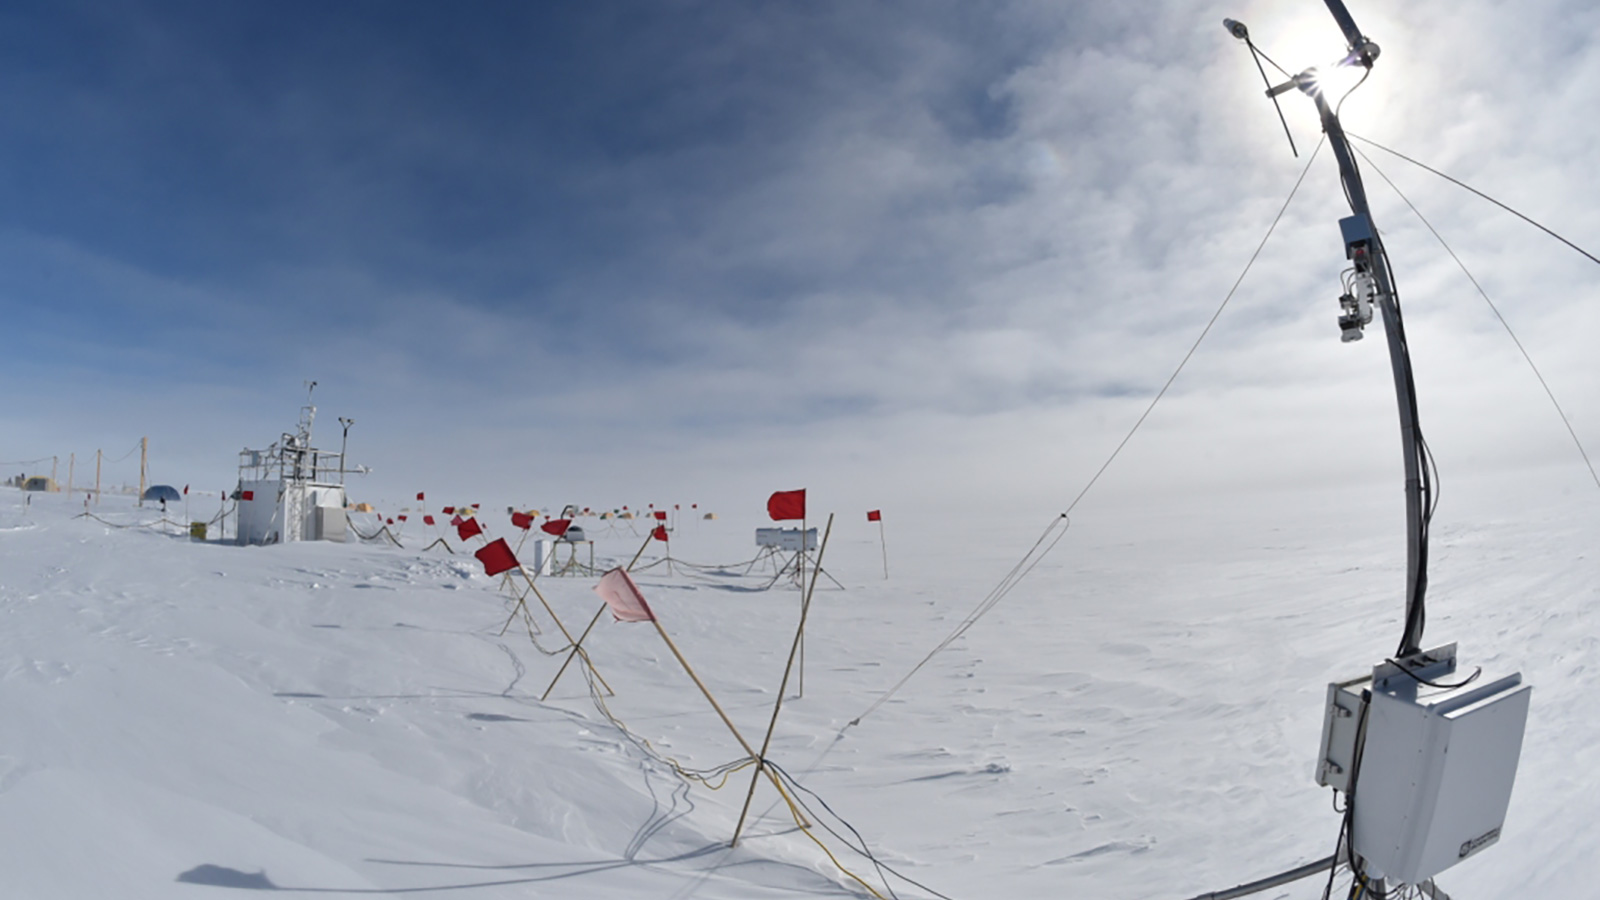 Beginning in late November 2015, a set of ARM equipment was deployed to the West Antarctic Ice Sheet, including basic radiometric, surface energy balance and upper air equipment directly to make the first well-calibrated climatological suite of measurements seen in this extremely remote, but globally critical, region in more than 40 years. (Image by U.S. Department of Energy Atmospheric Radiation Measurement [ARM] Research Facility.)